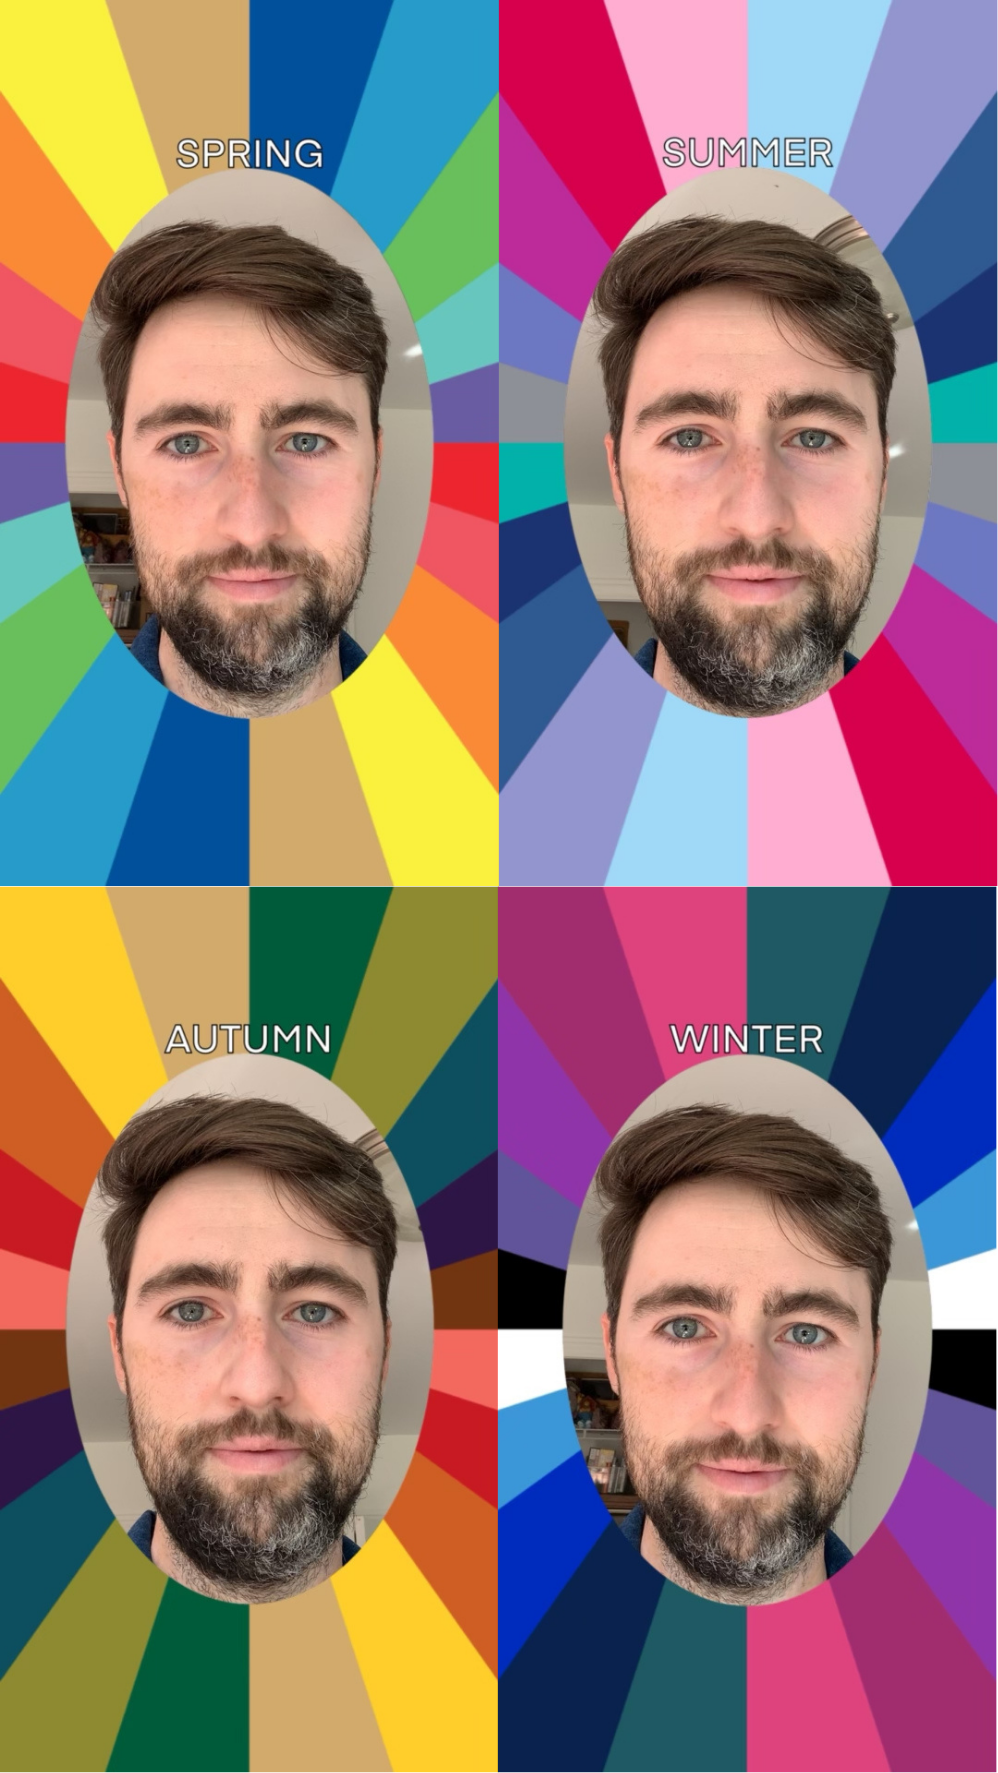 Four oval portraits of the same man with different seasonal color palettes labeled &#x27;Spring,&#x27; &#x27;Summer,&#x27; &#x27;Autumn,&#x27; and &#x27;Winter&#x27; surrounding his face